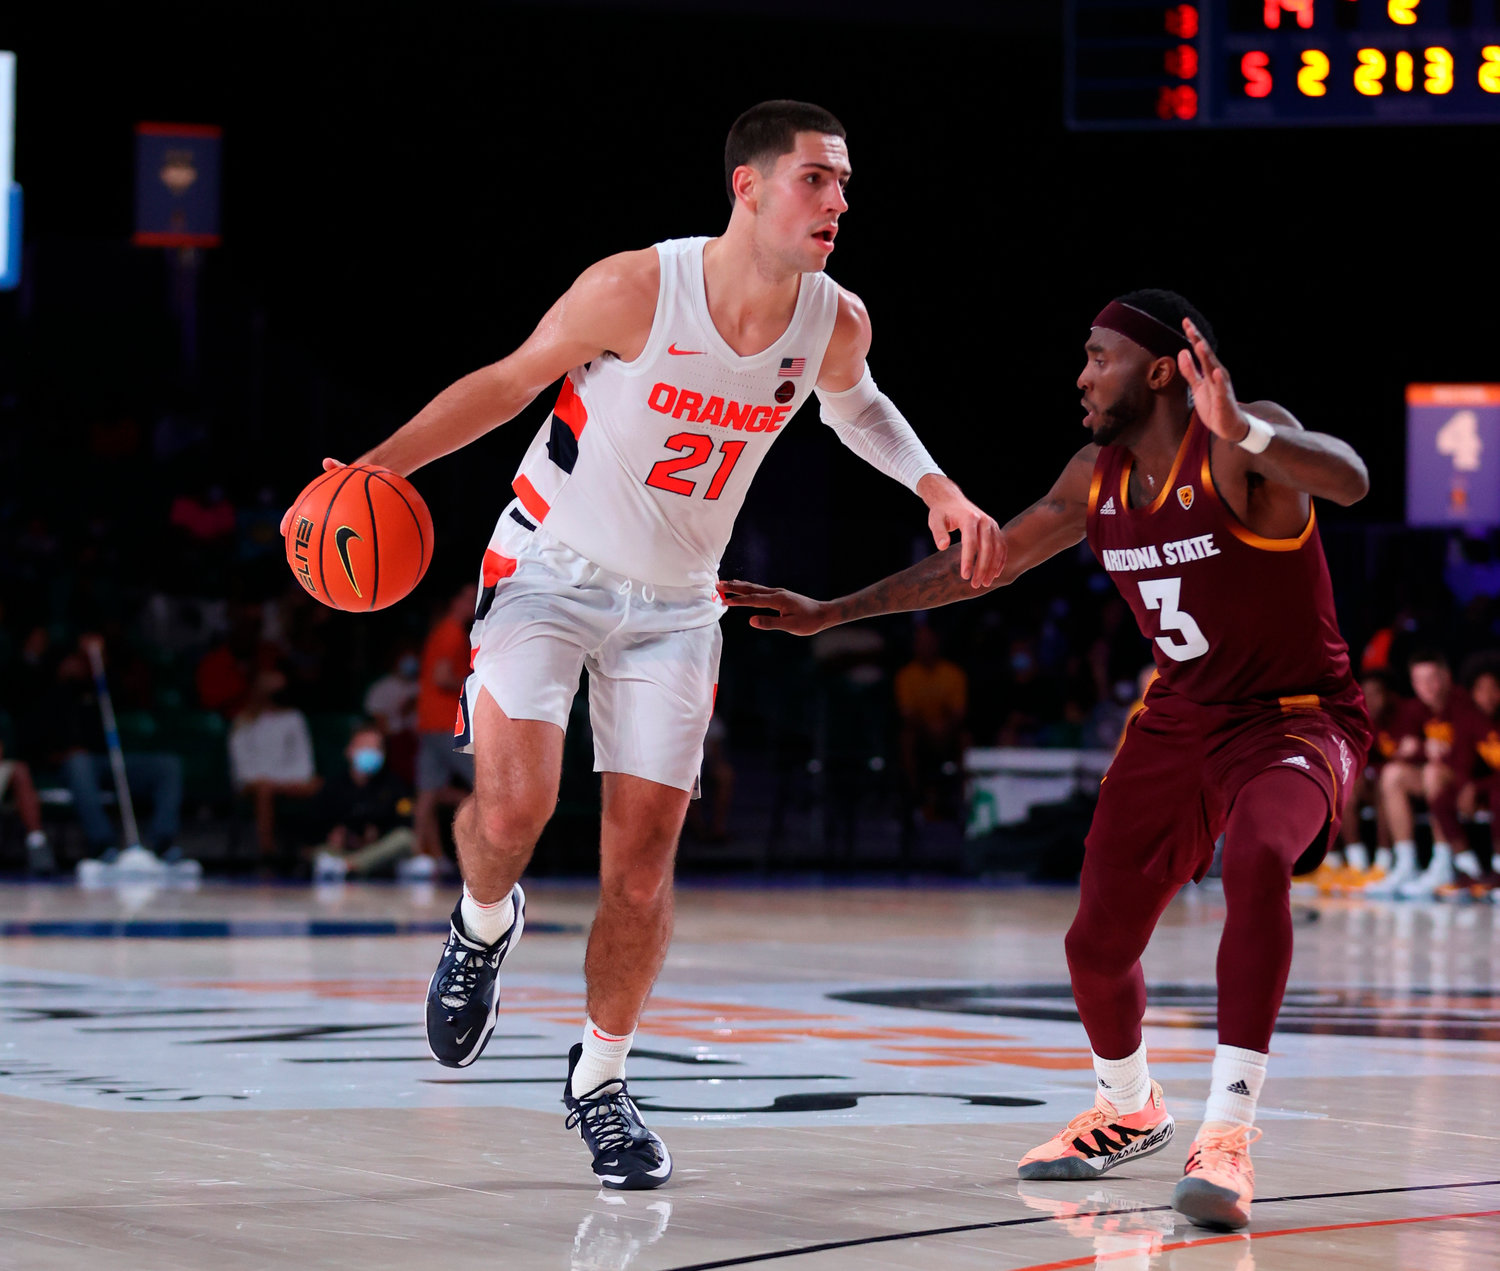 DRIVING — Syracuse forward Cole Swider (21) works against Arizona State guard Marreon Jackson (3) during an NCAA basketball game at Paradise Island, Bahamas, Thursday, Nov. 25. Syracuse bounced back from Wednesday night's loss to Virginia Commonwealth and defeated Arizona State, 92-84.